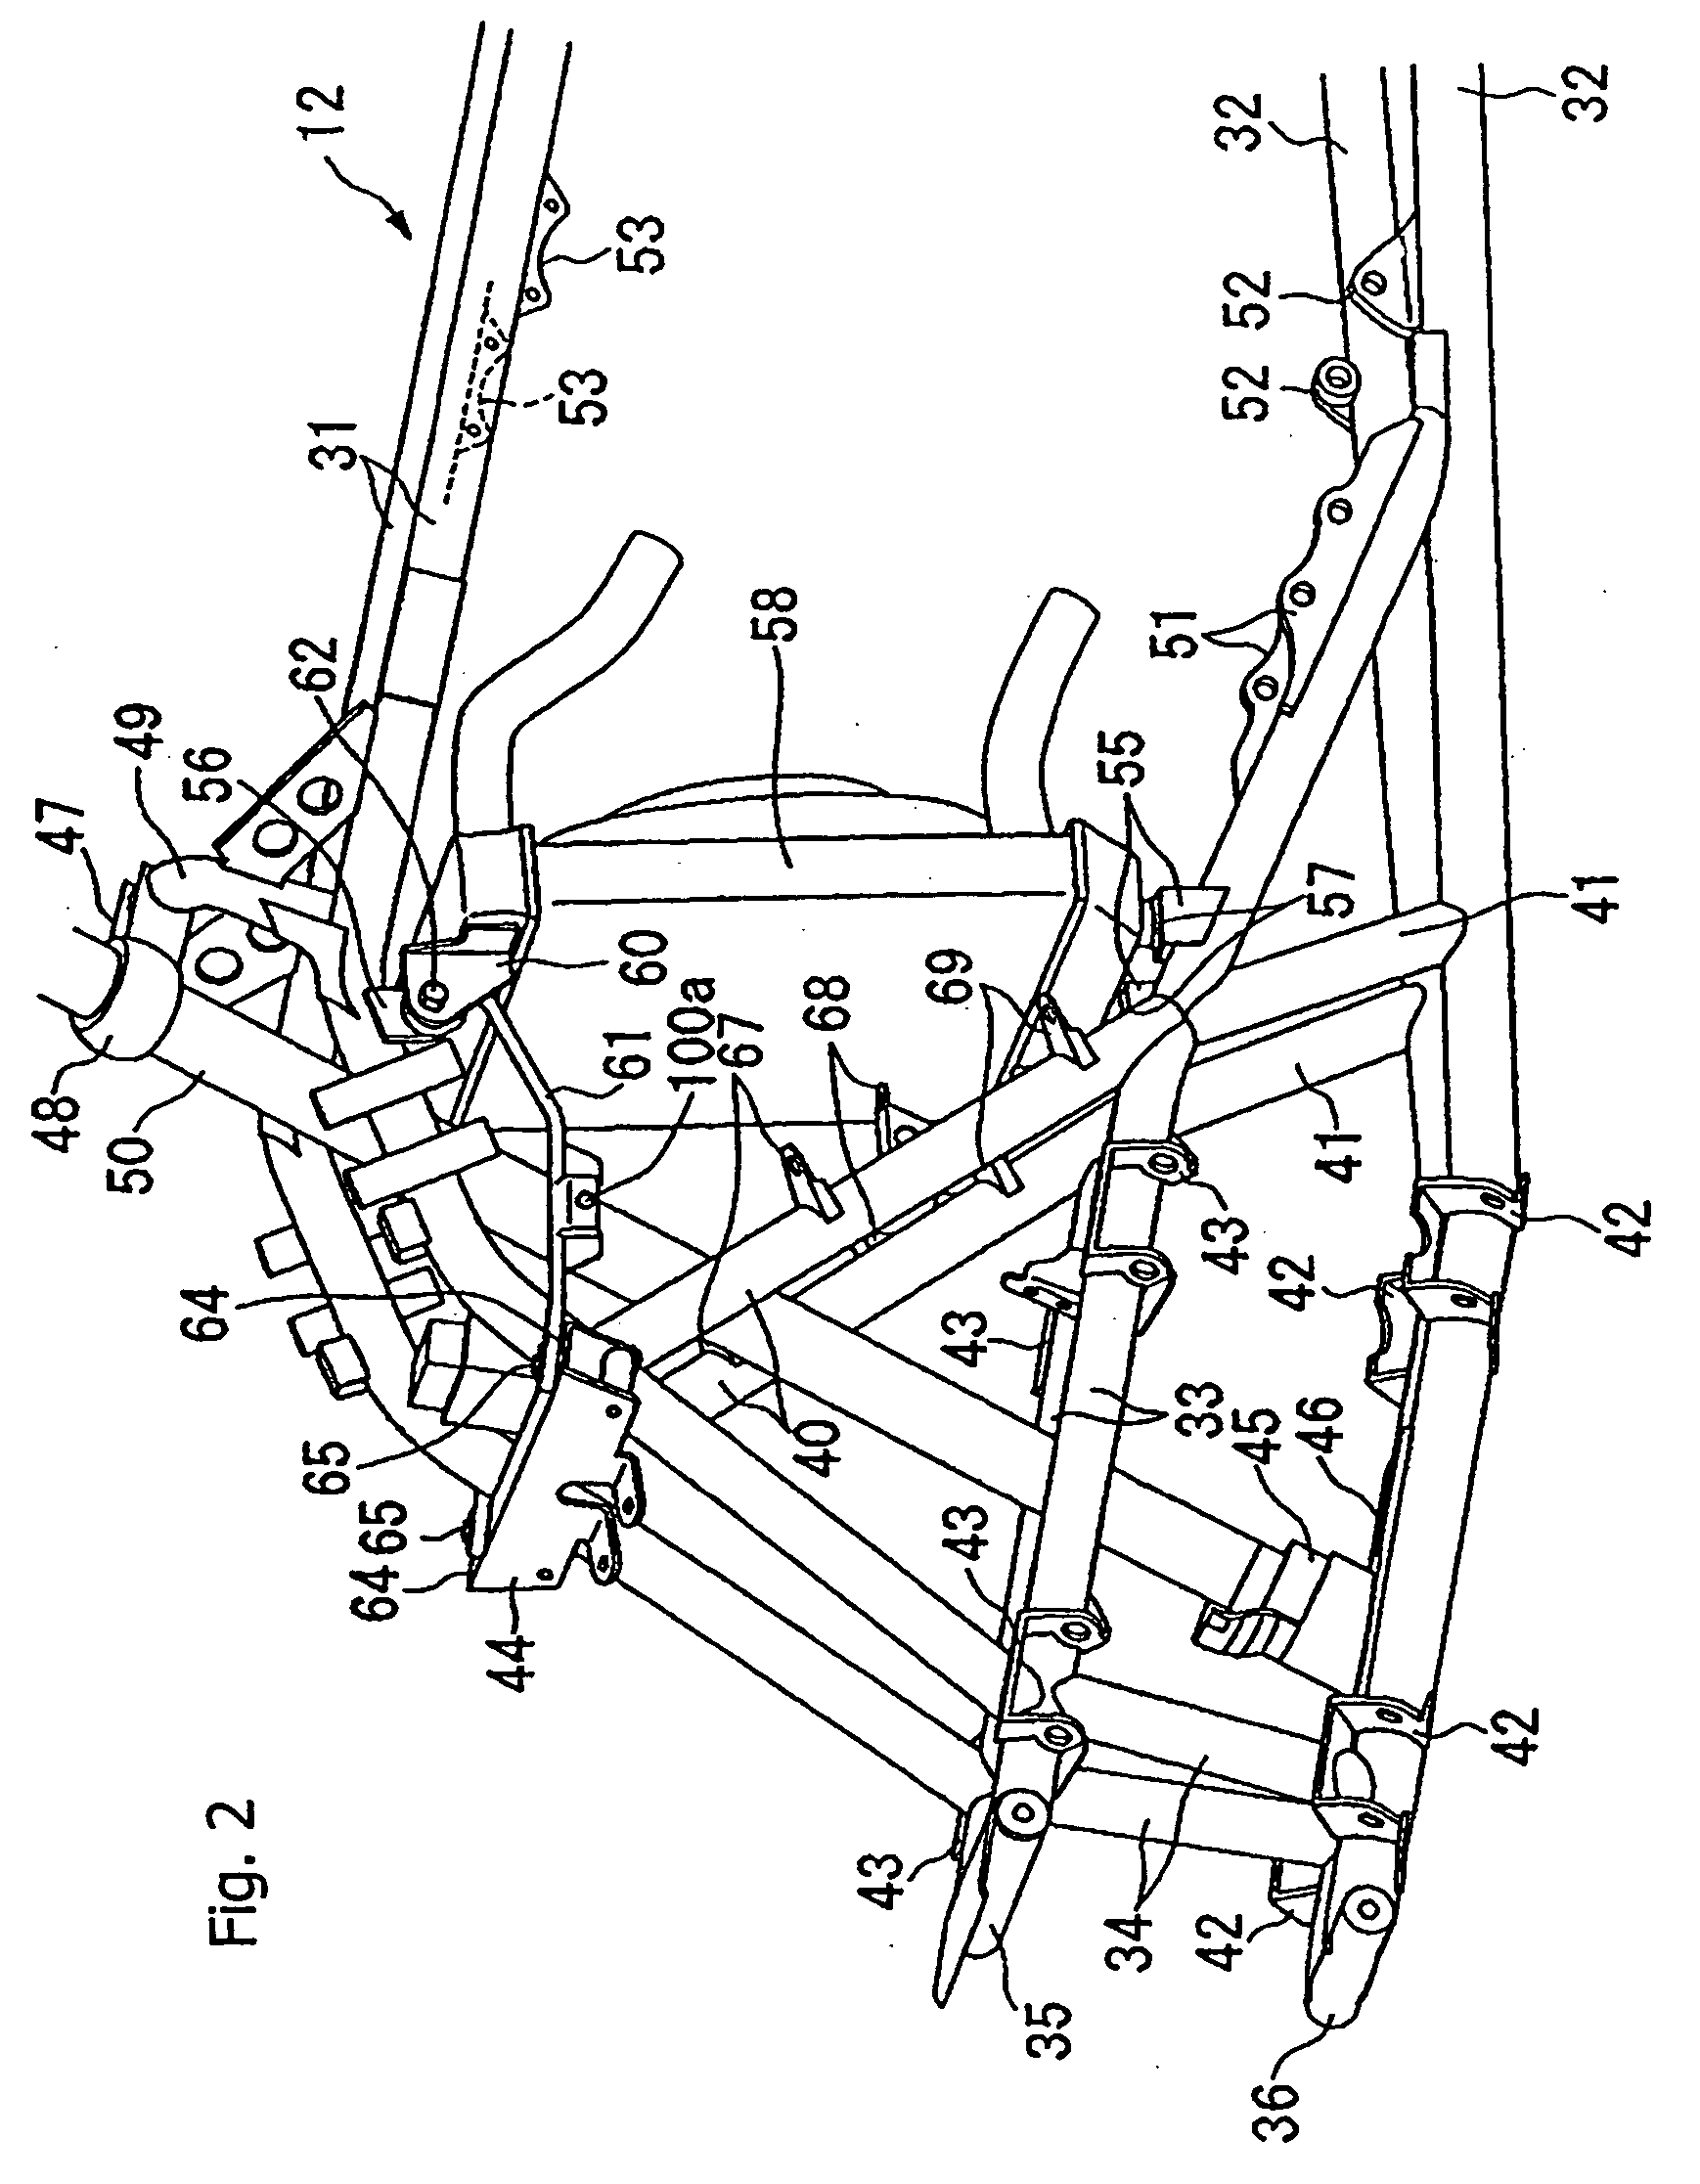 Front end components for a saddle-type vehicle